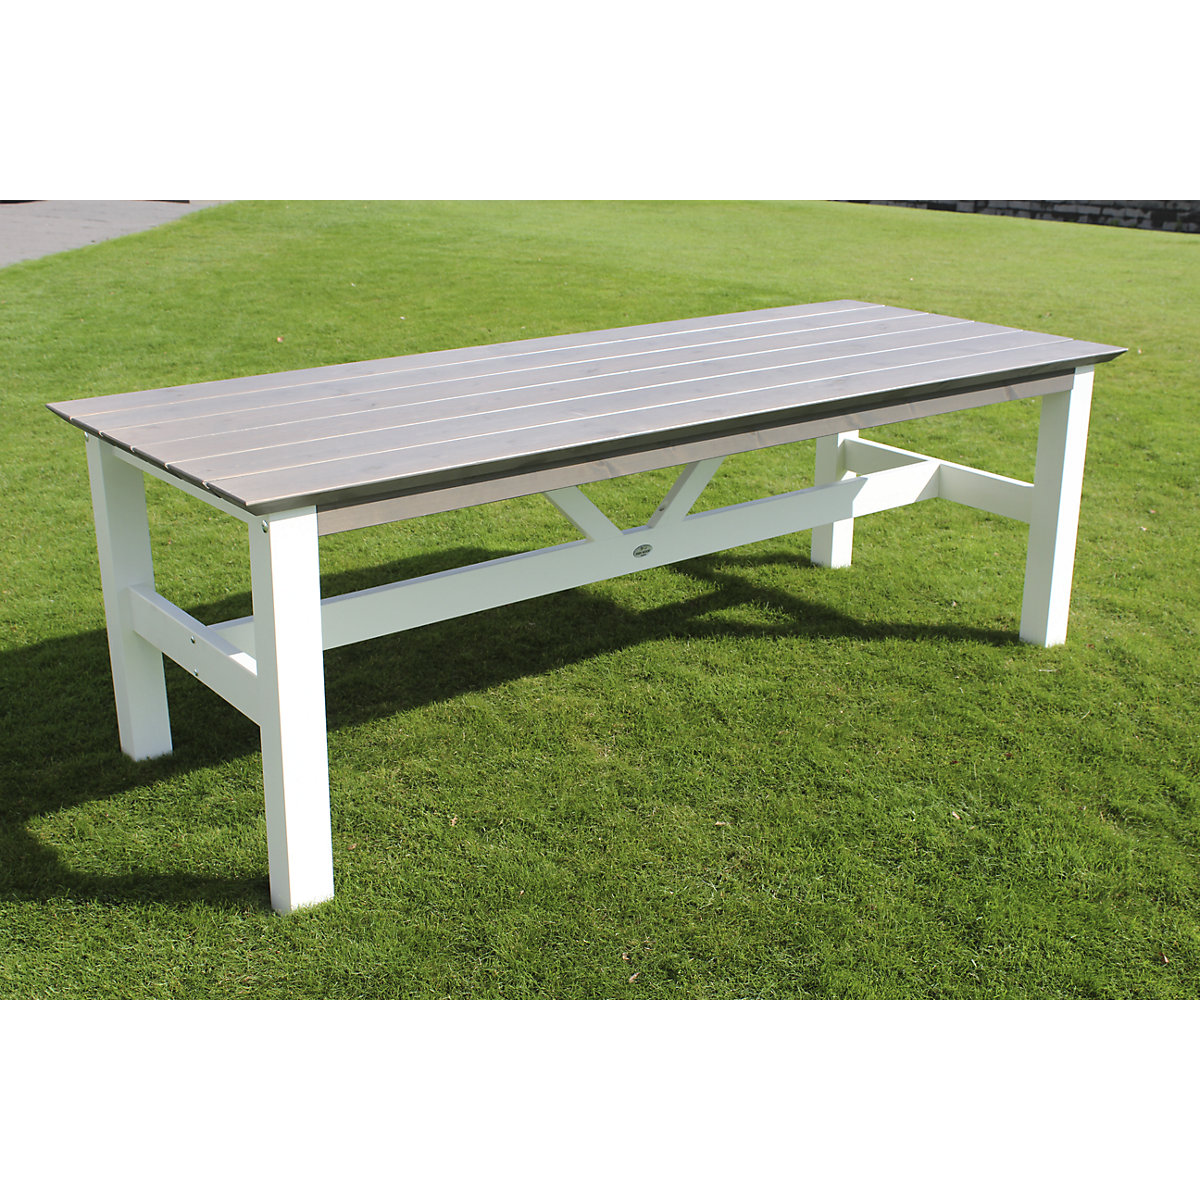 VIKING outdoor furniture series, table LxWxH 2200 x 900 x 770 mm, grey / white-5